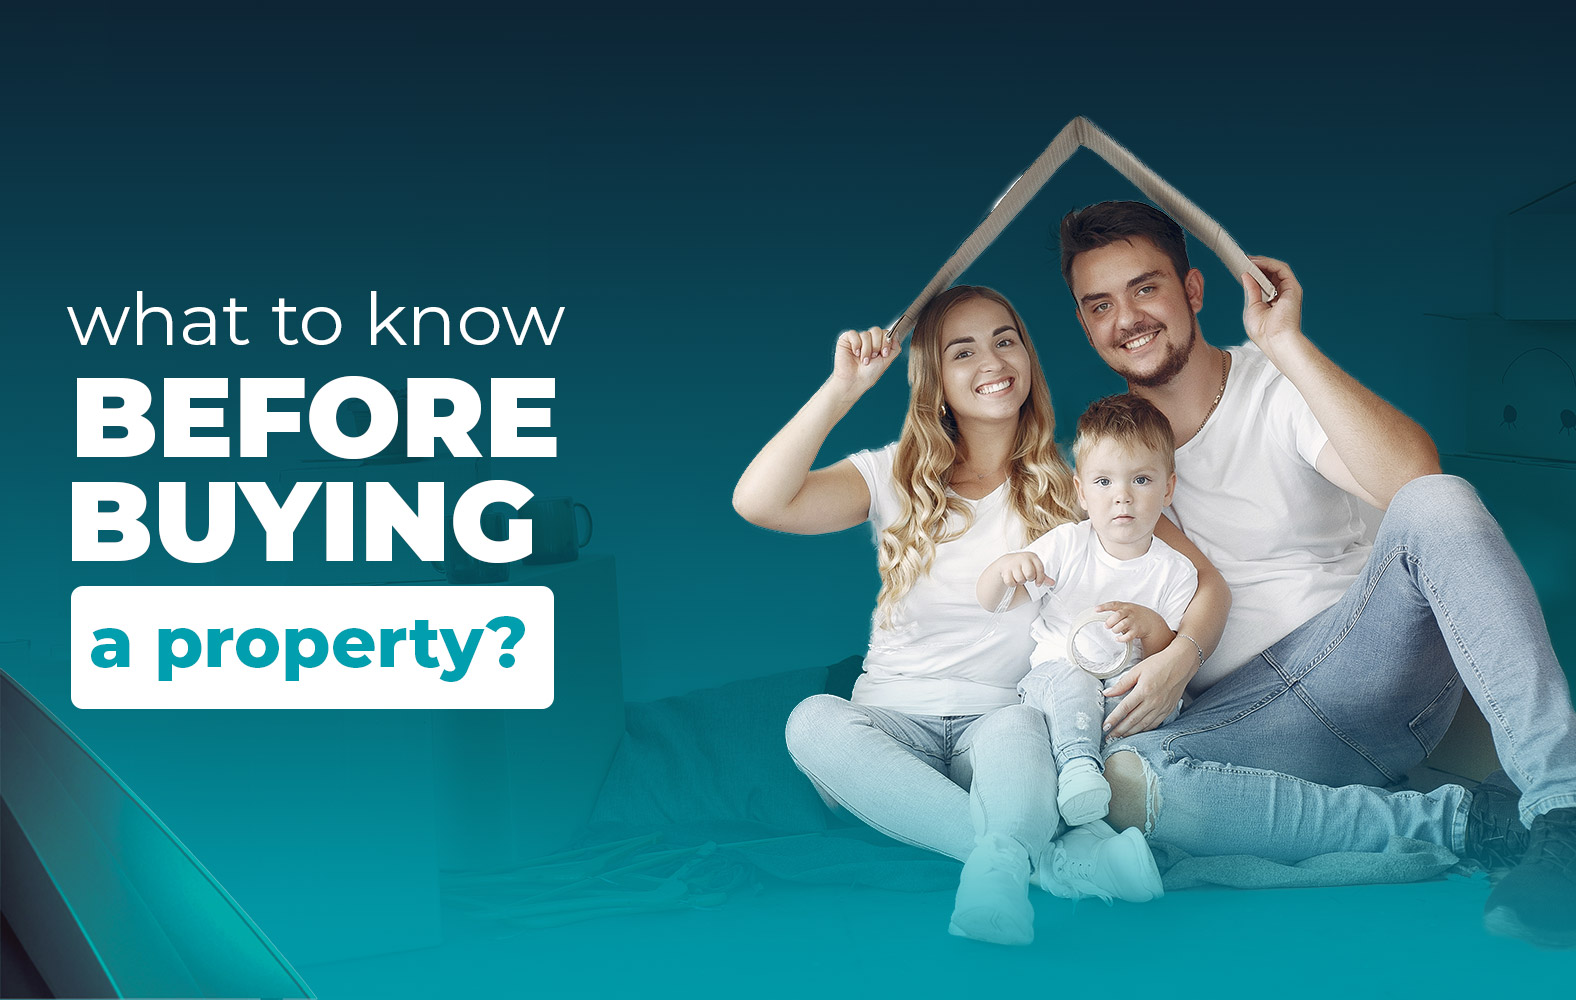 This is what you should take into account before buying a property